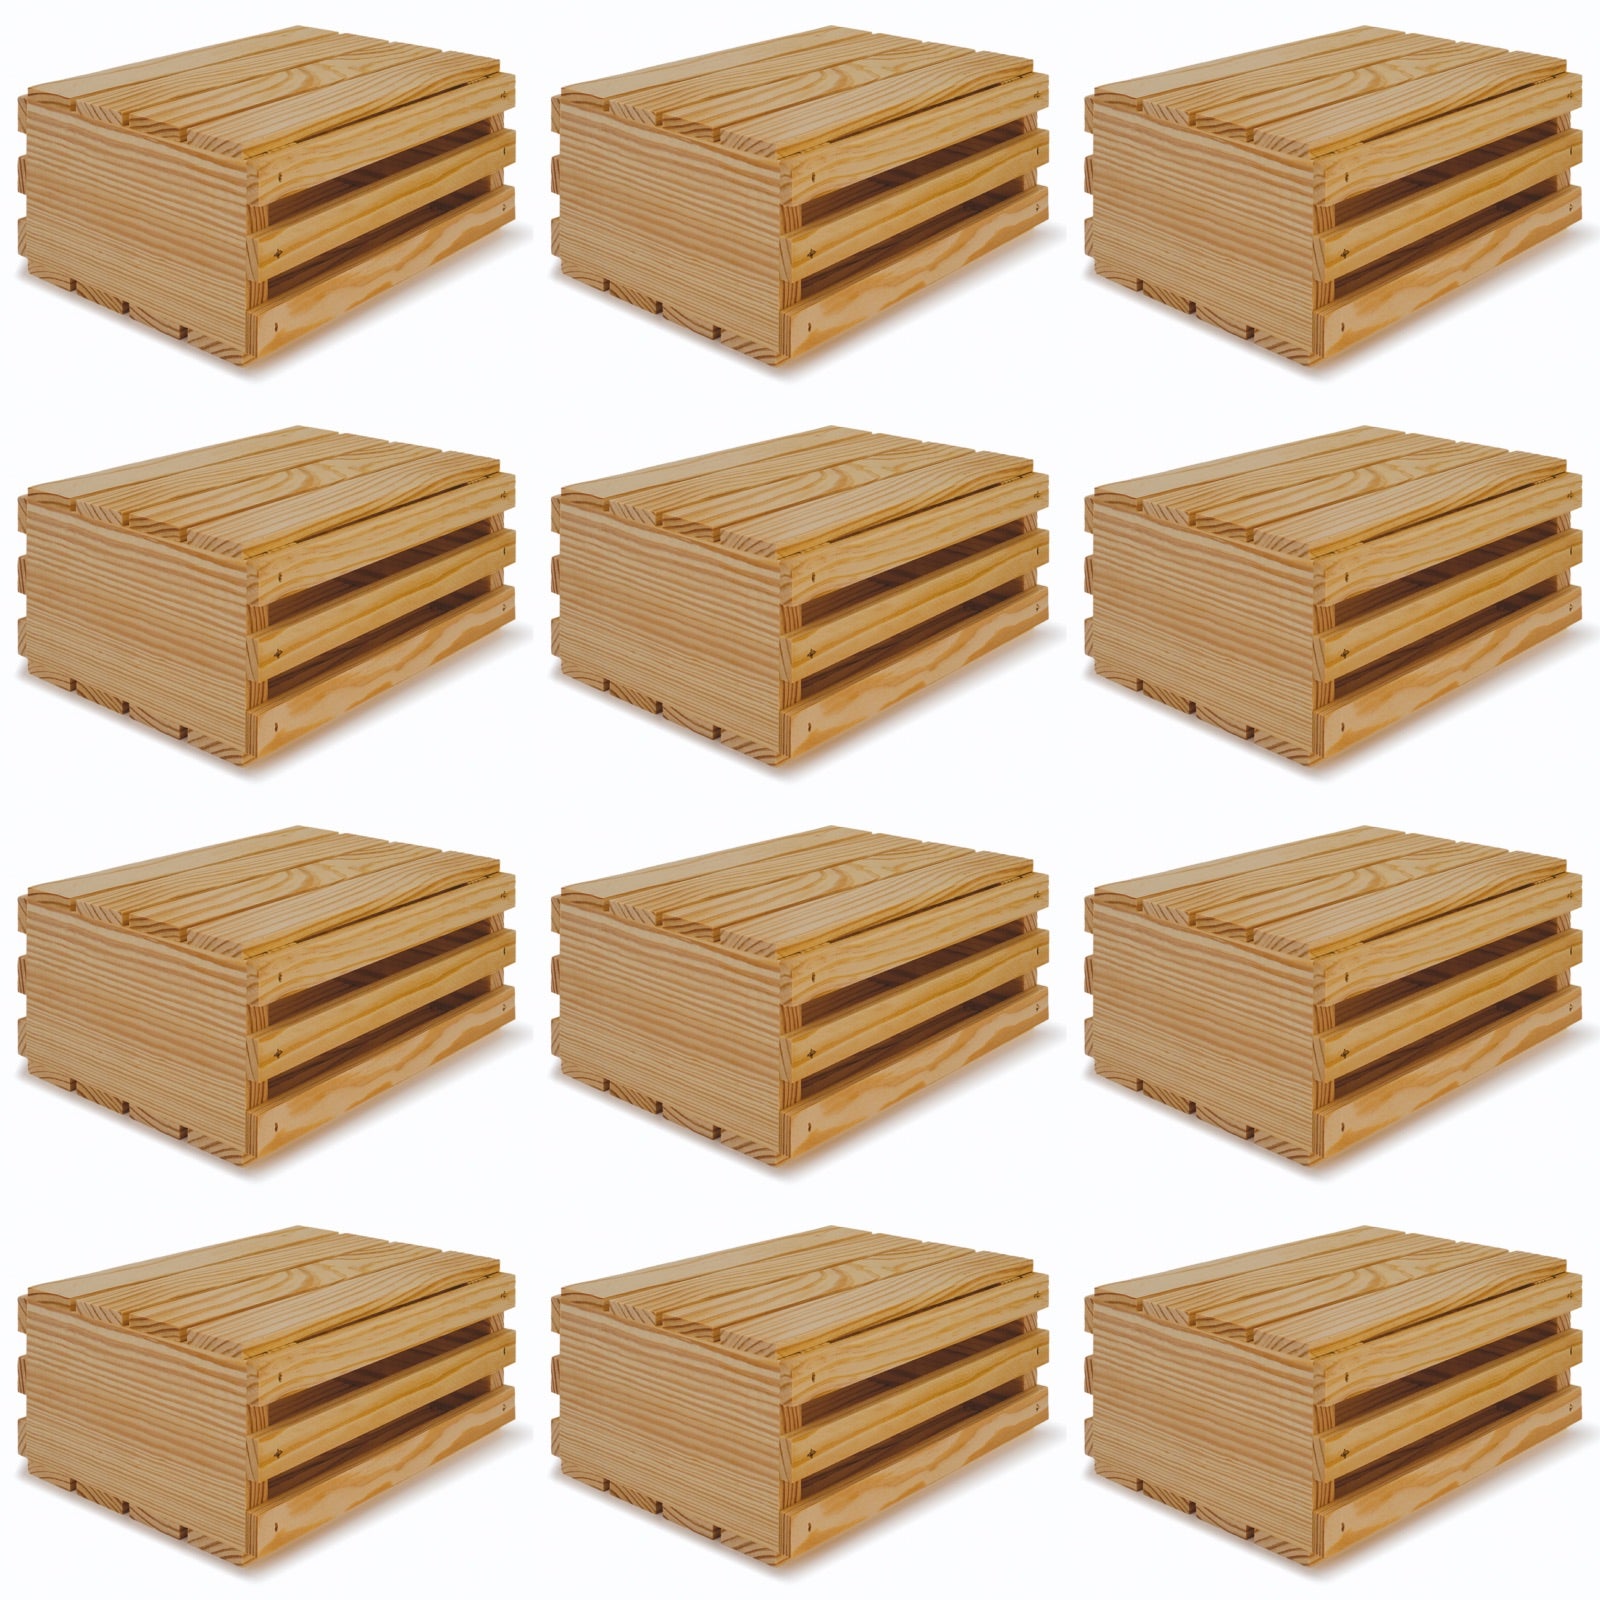 12 Small wooden crates with lid 10x8x4.5, 6-SS-10-8-4.5-NX-NW-LL, 12-SS-10-8-4.5-NX-NW-LL, 24-SS-10-8-4.5-NX-NW-LL, 48-SS-10-8-4.5-NX-NW-LL, 96-SS-10-8-4.5-NX-NW-LL